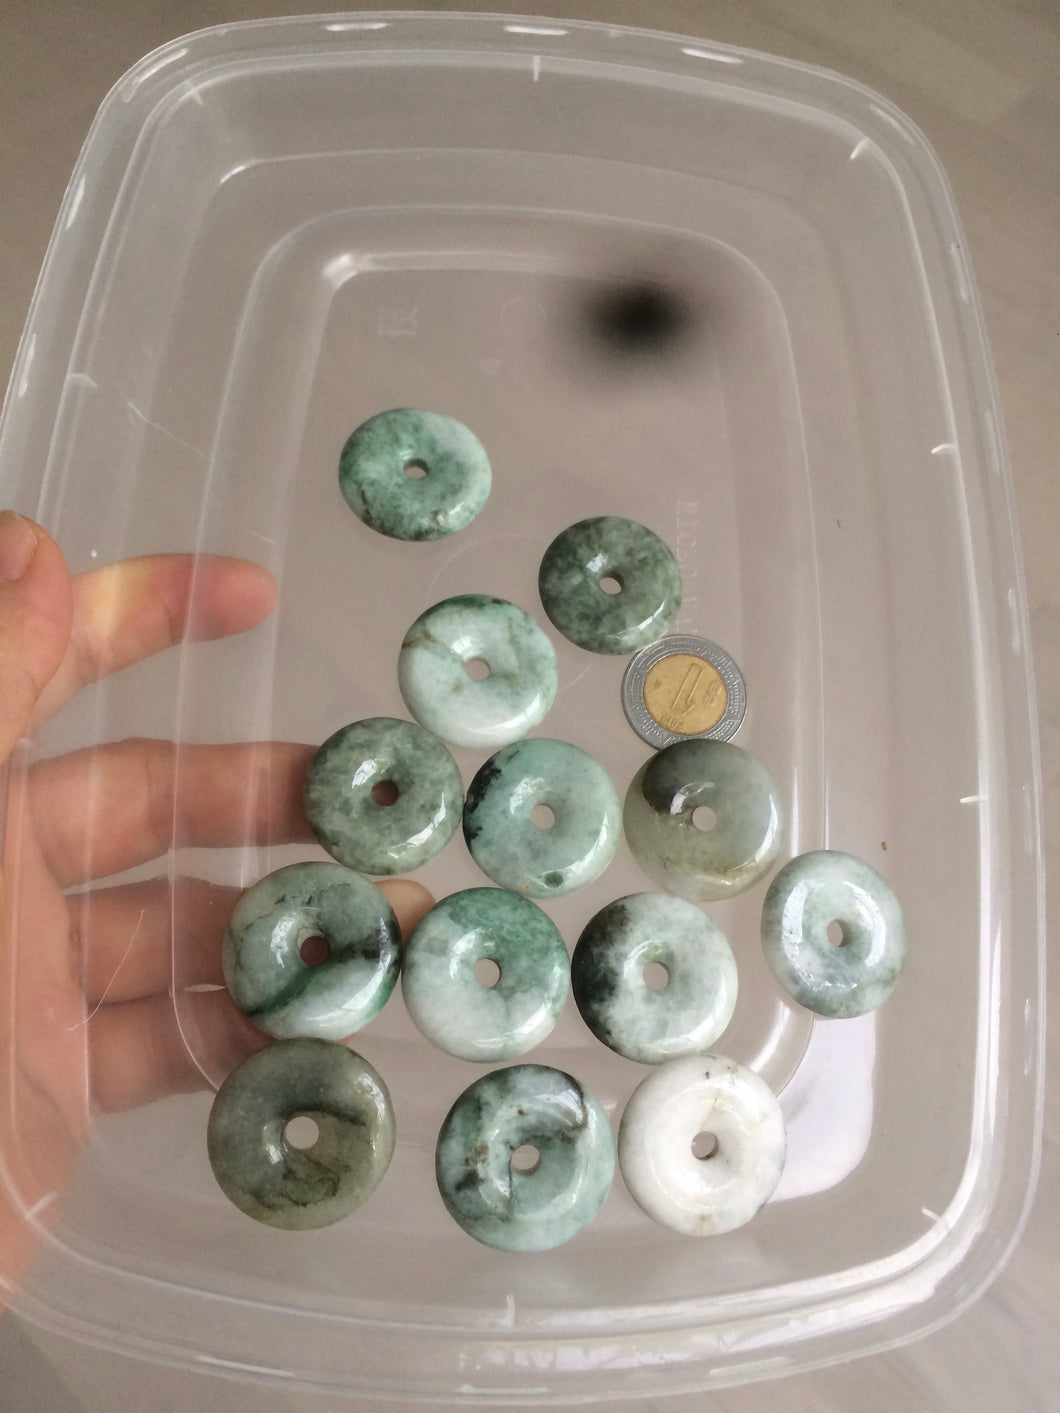 24-25mm Type A 100% Natural dark green/white Jadeite Jade Safety Guardian Button donut Pendant group AK40-1 (Add-on items)